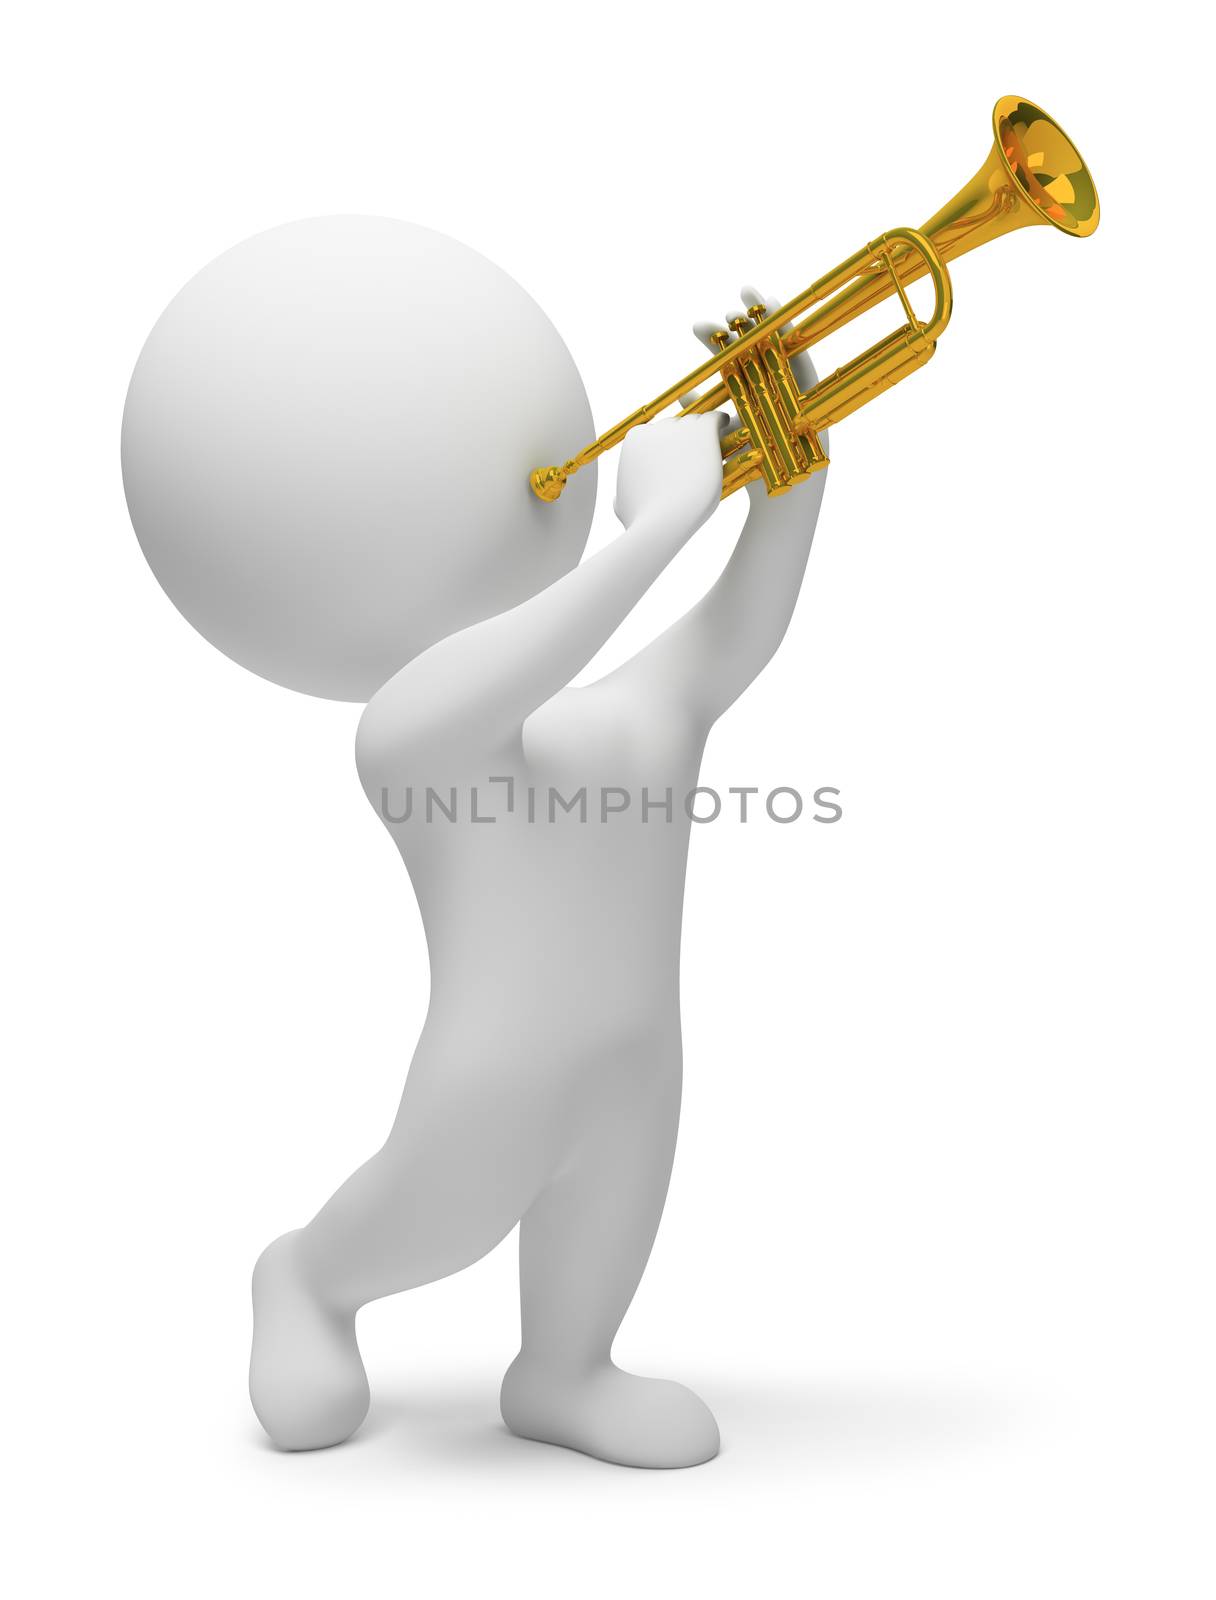 3d people plays with trumpet. 3d image. Isolated white background.